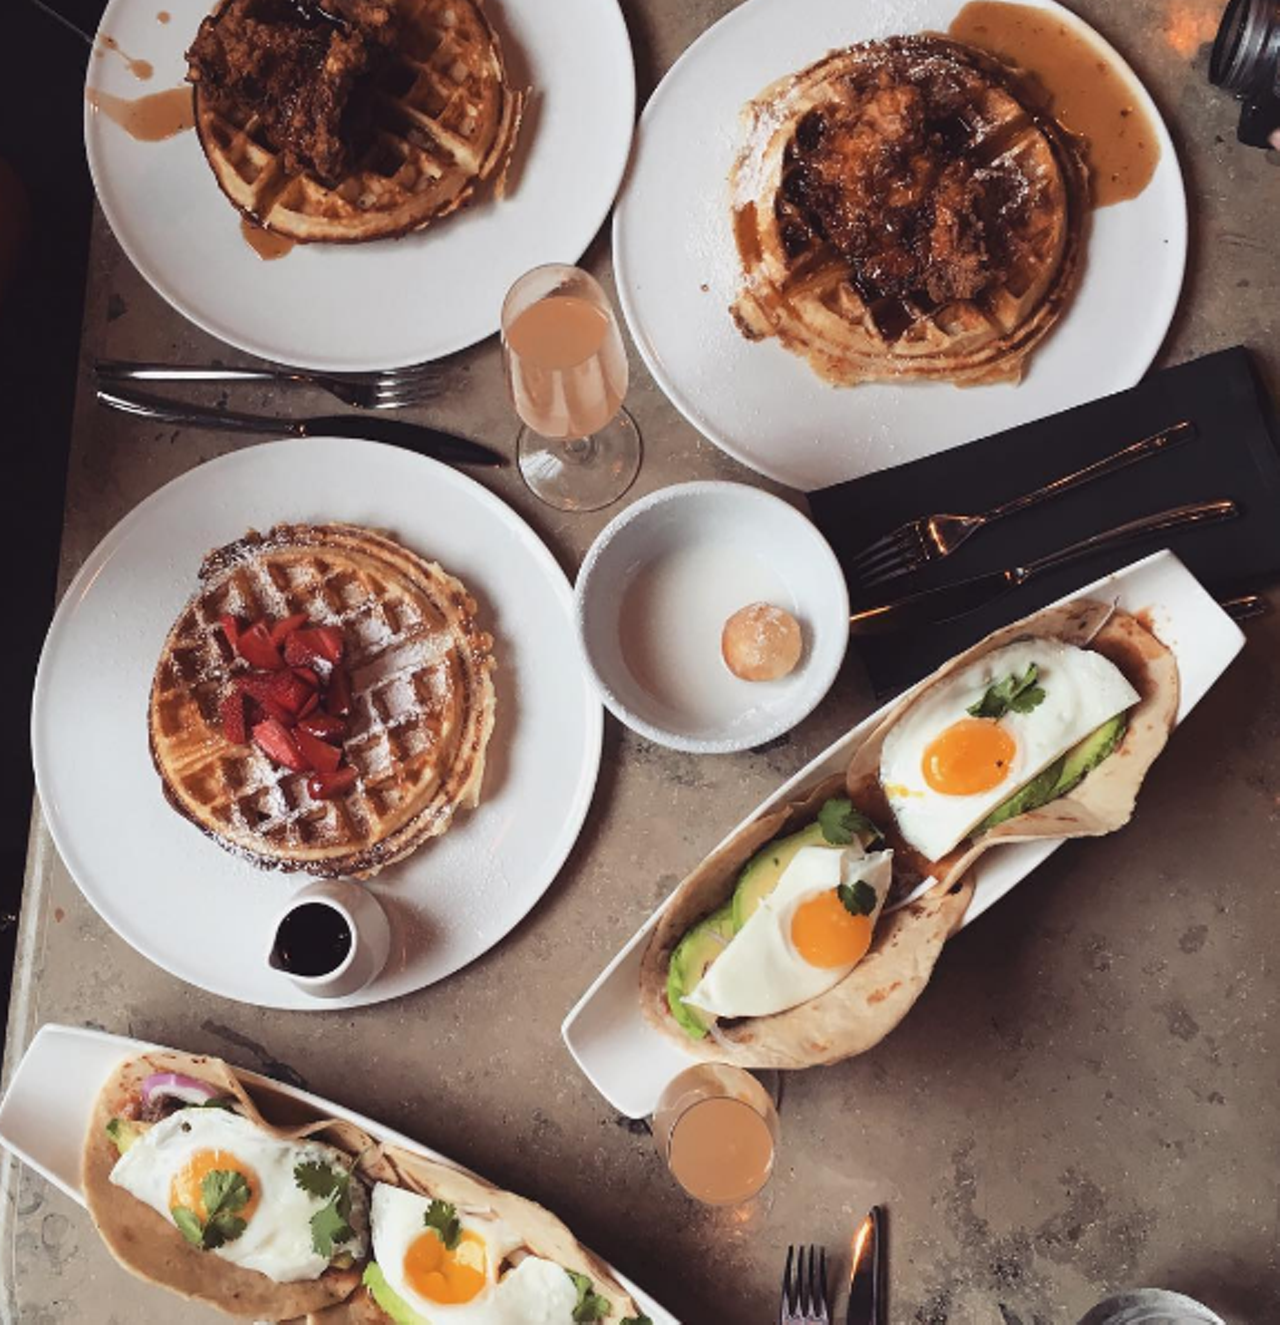 Brigid
803 S St Mary's St, (210) 263-7885
Not all menu items are fifteen-dollar friendly, but  you can still enjoy most of the brunch menu and a few dishes for supper.
Photo via Instagram/safoodbites